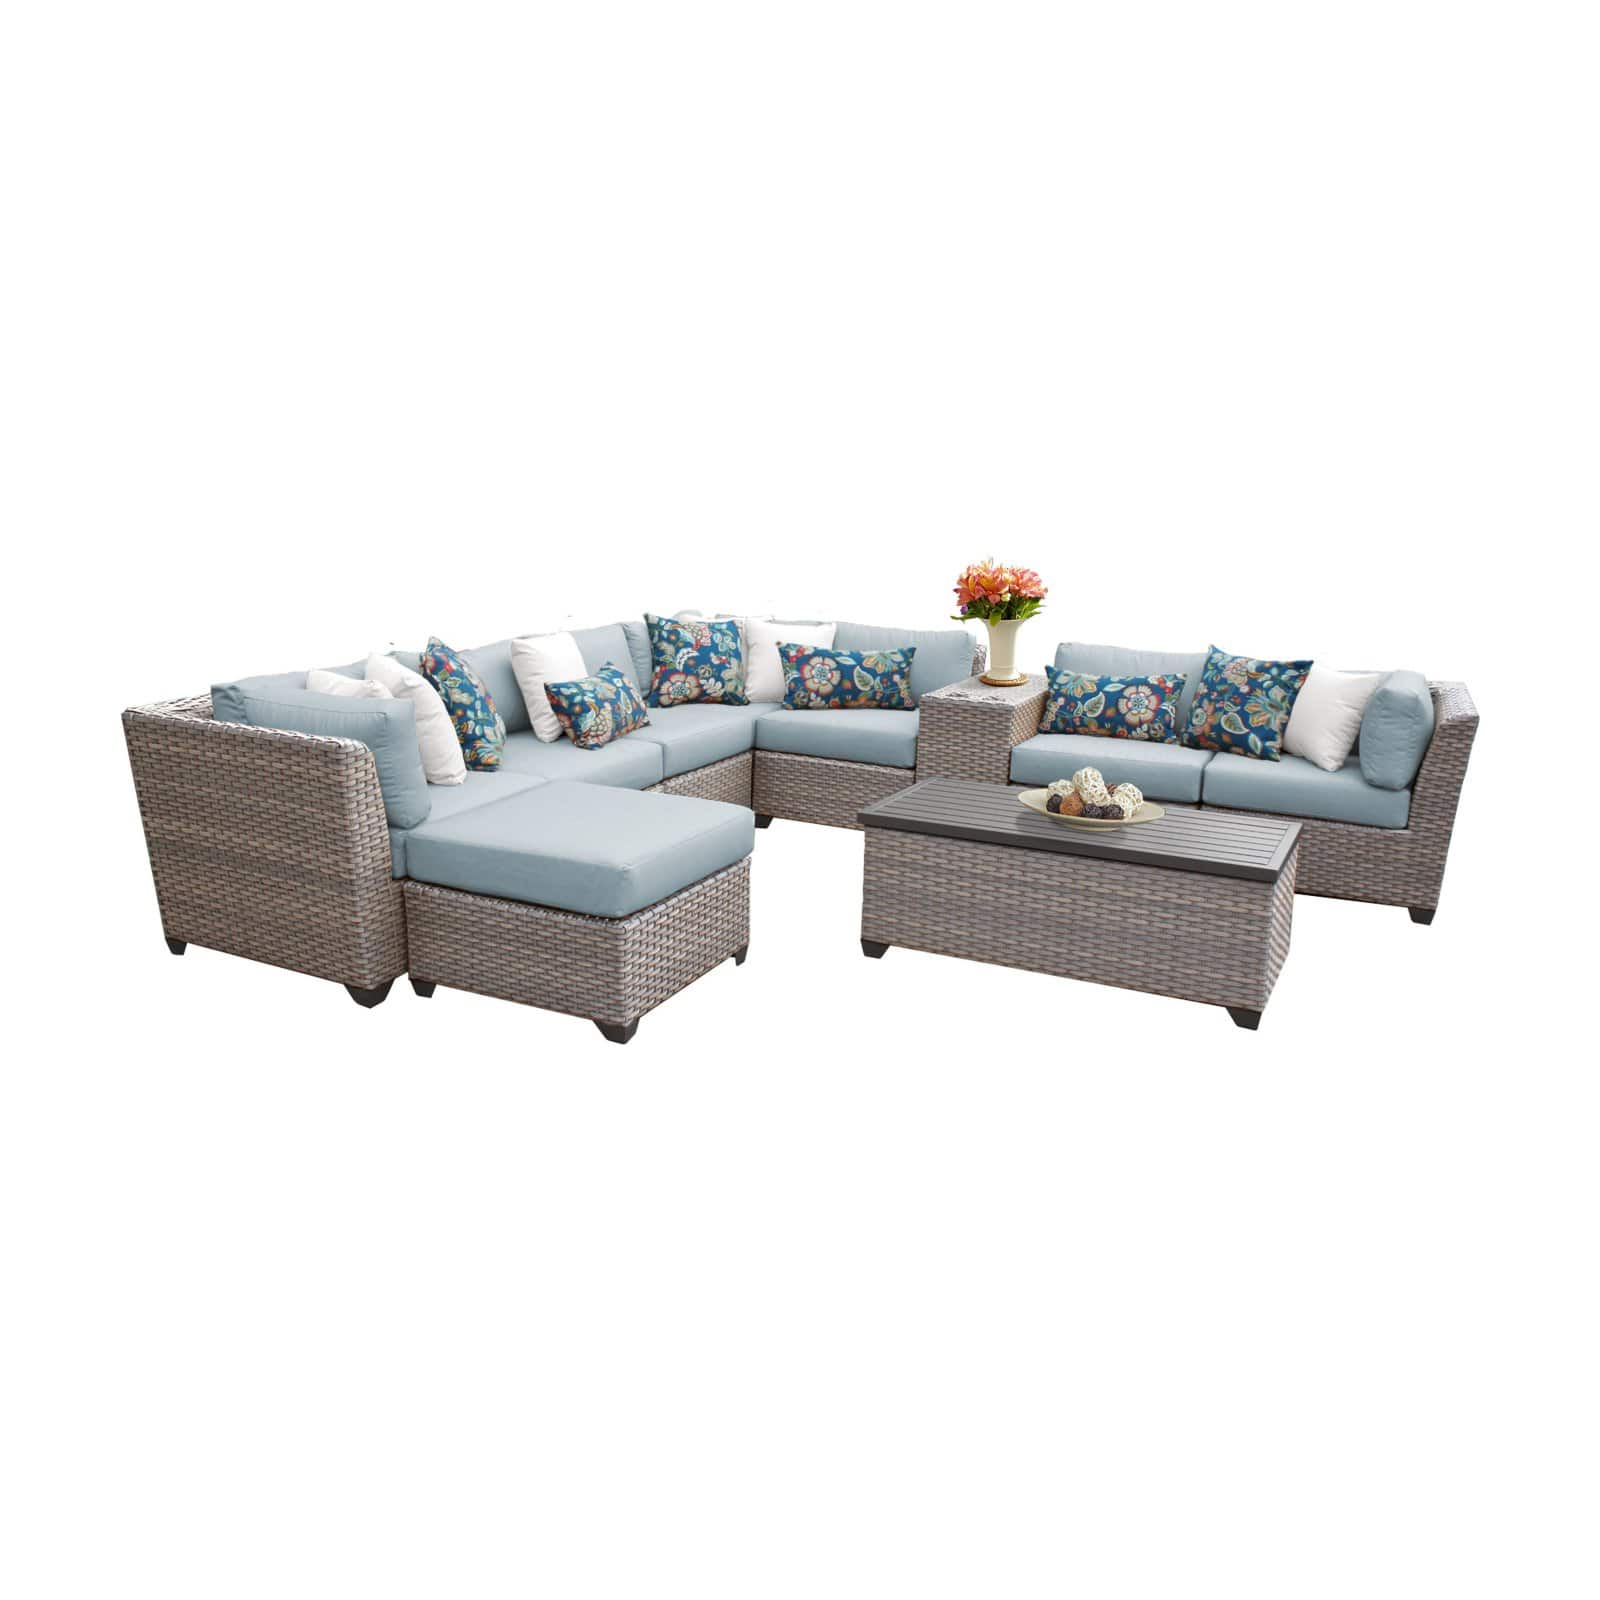 Florence 3 Piece Outdoor Wicker Patio Furniture Set 03c - image 2 of 2